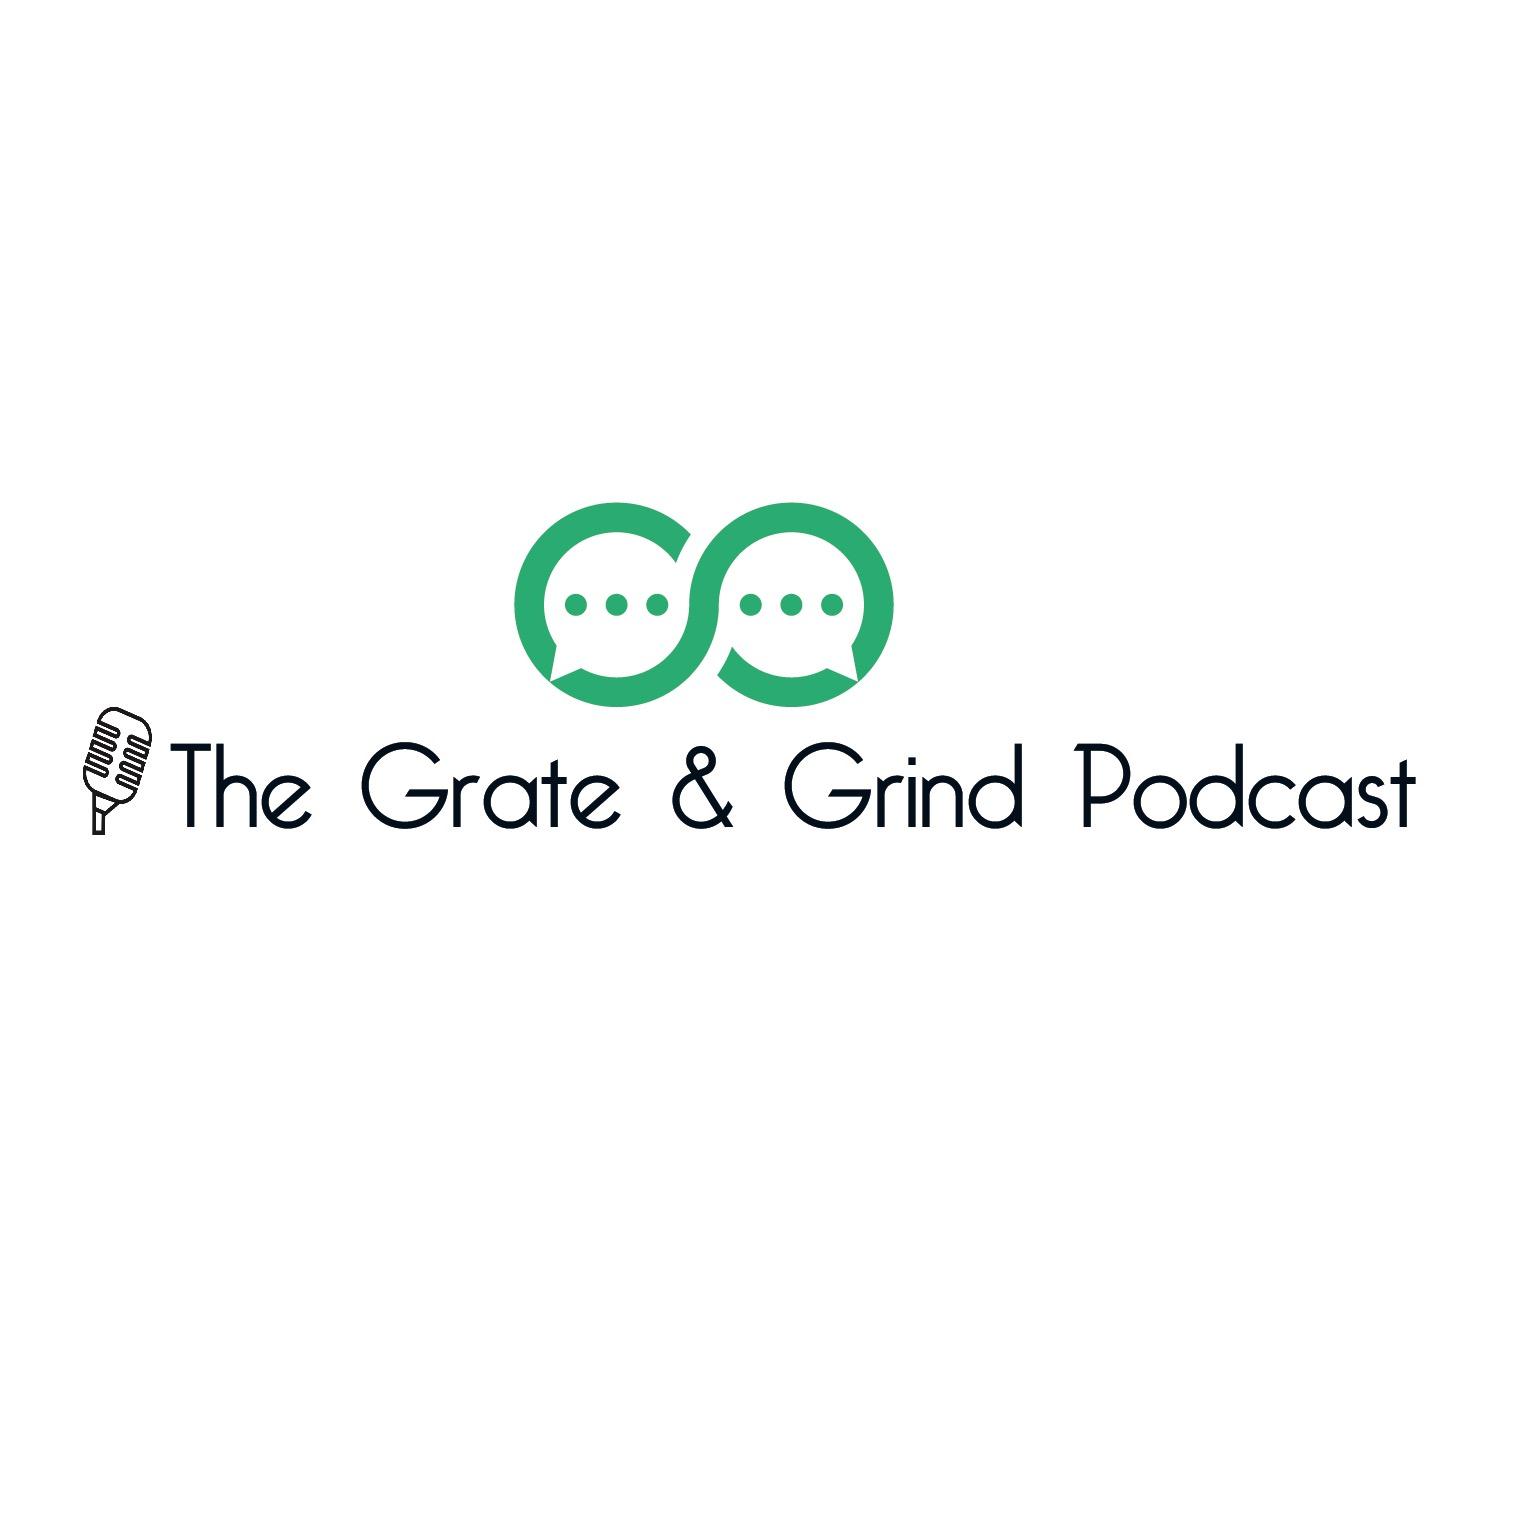 The Grate & Grind Podcast